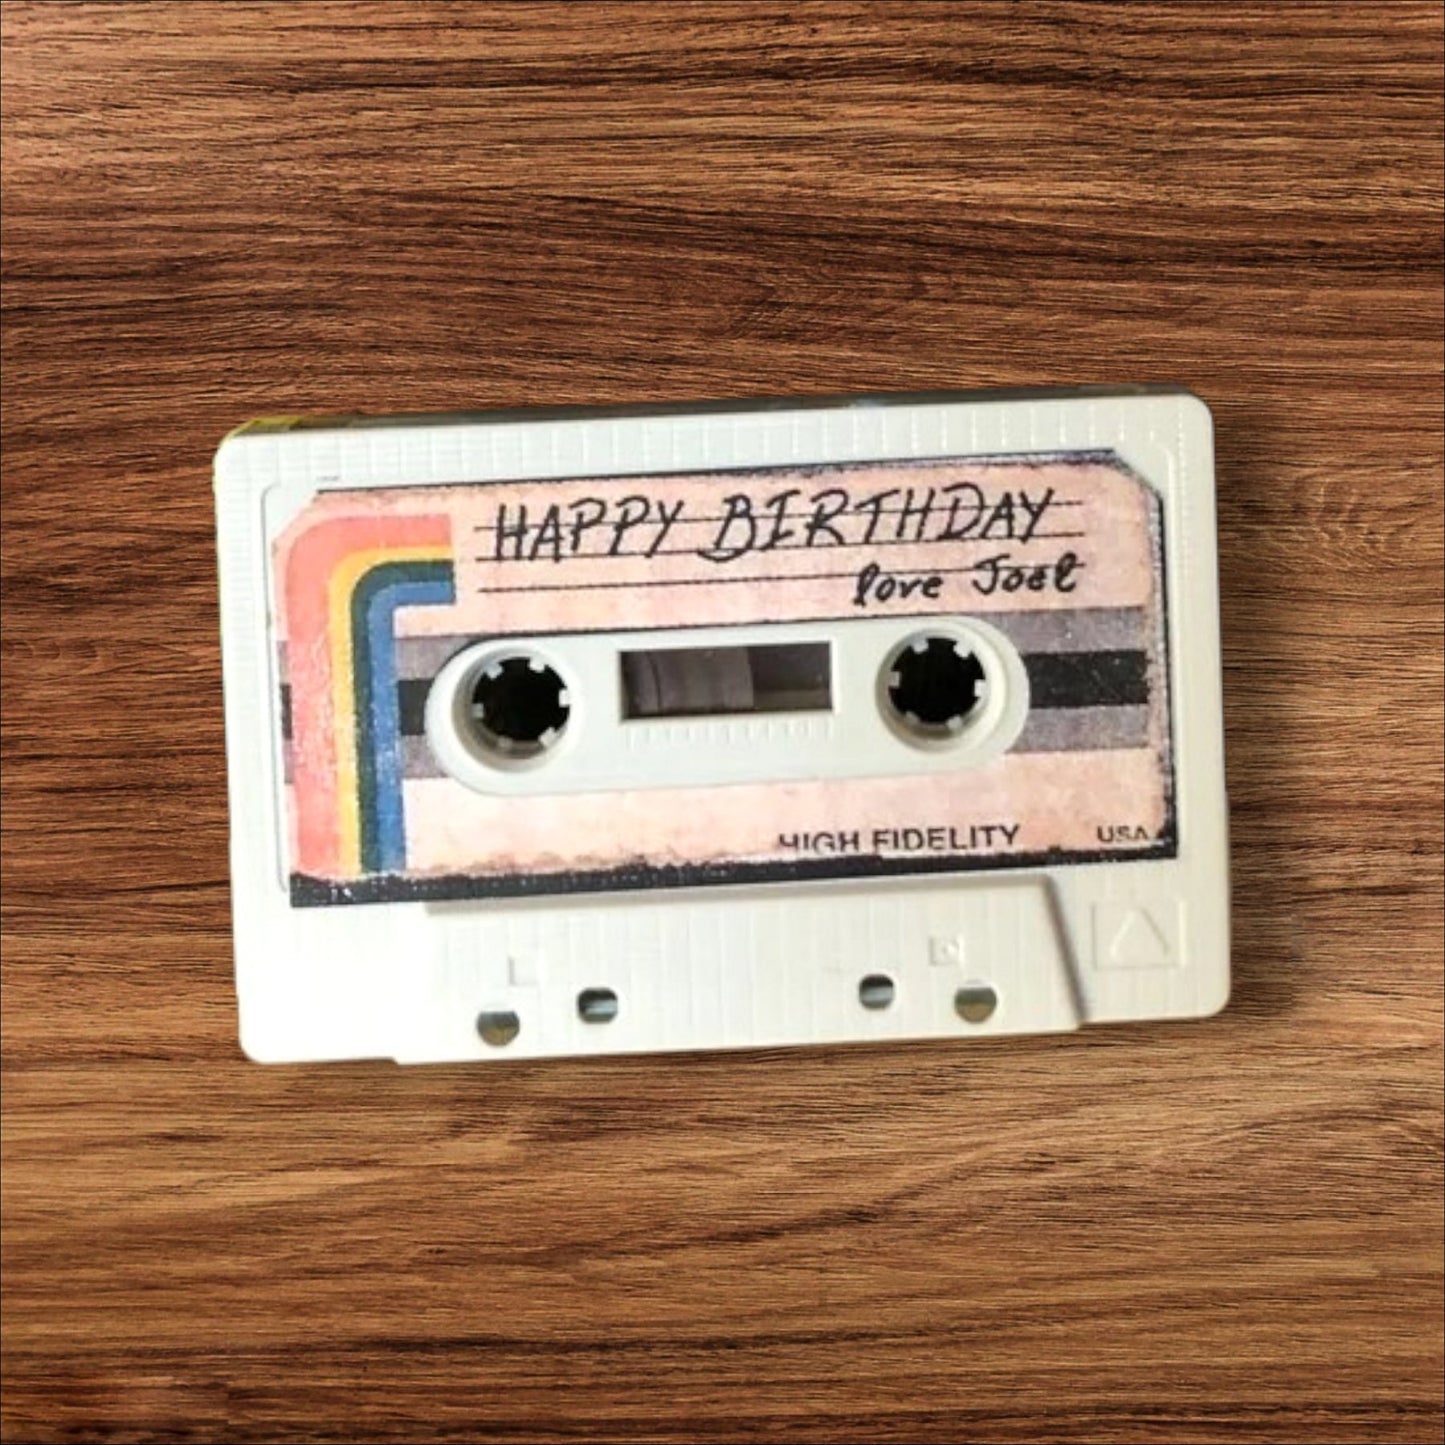 The Last of Us Birthday Cassette Tape with Working Audio Tape - Available at 2Fast2See.co